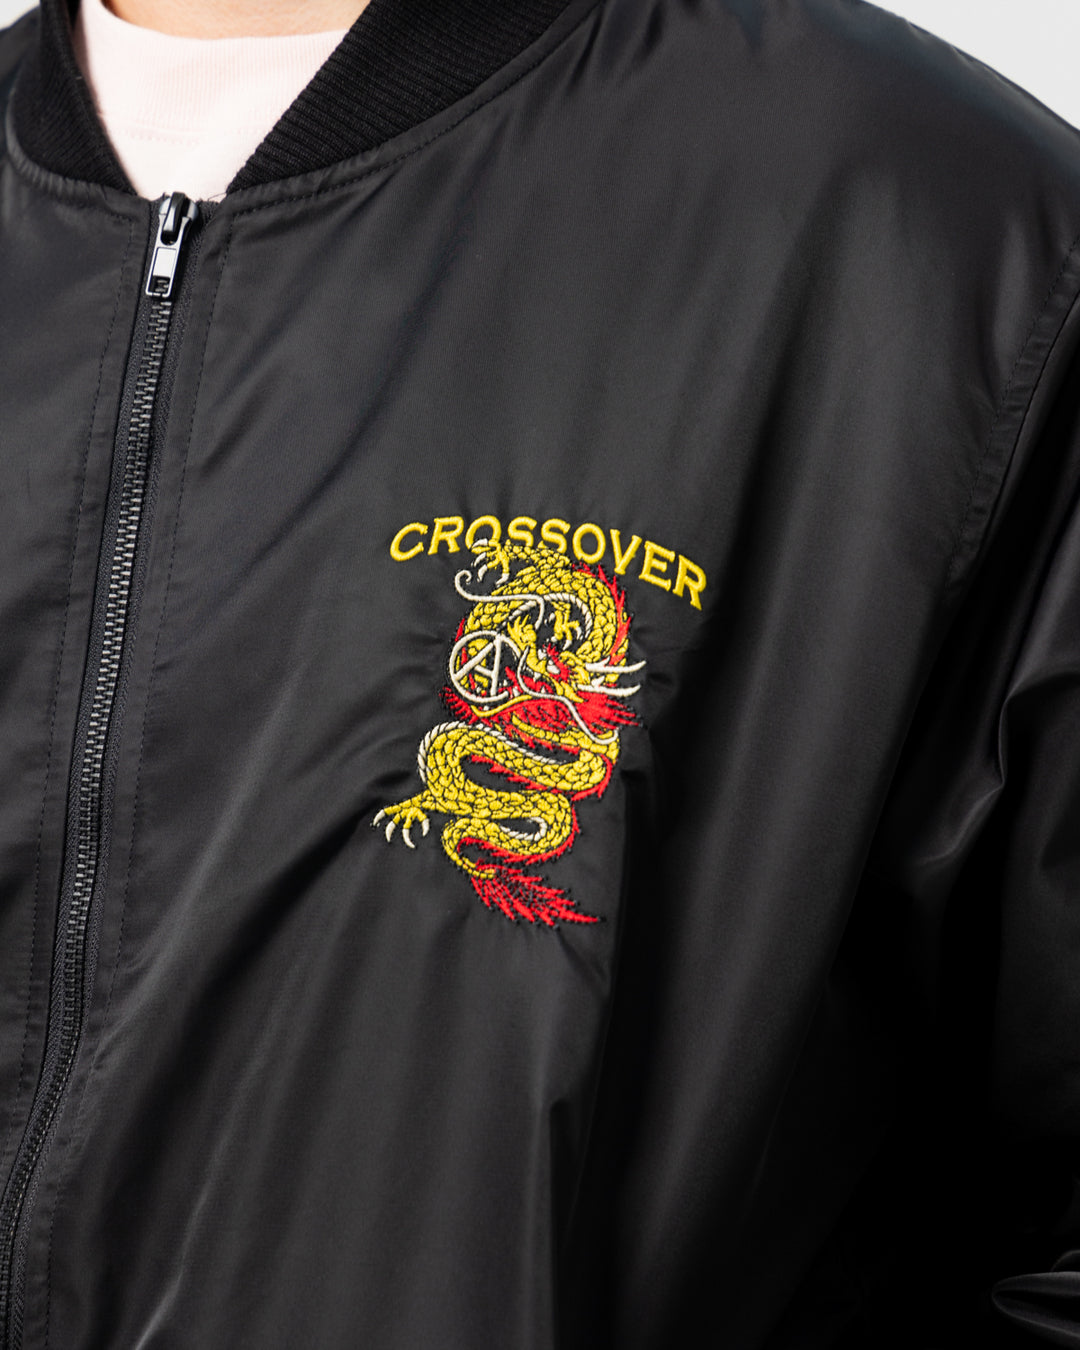 CROSSOVER "Year Of The Dragon" Jacket | Black